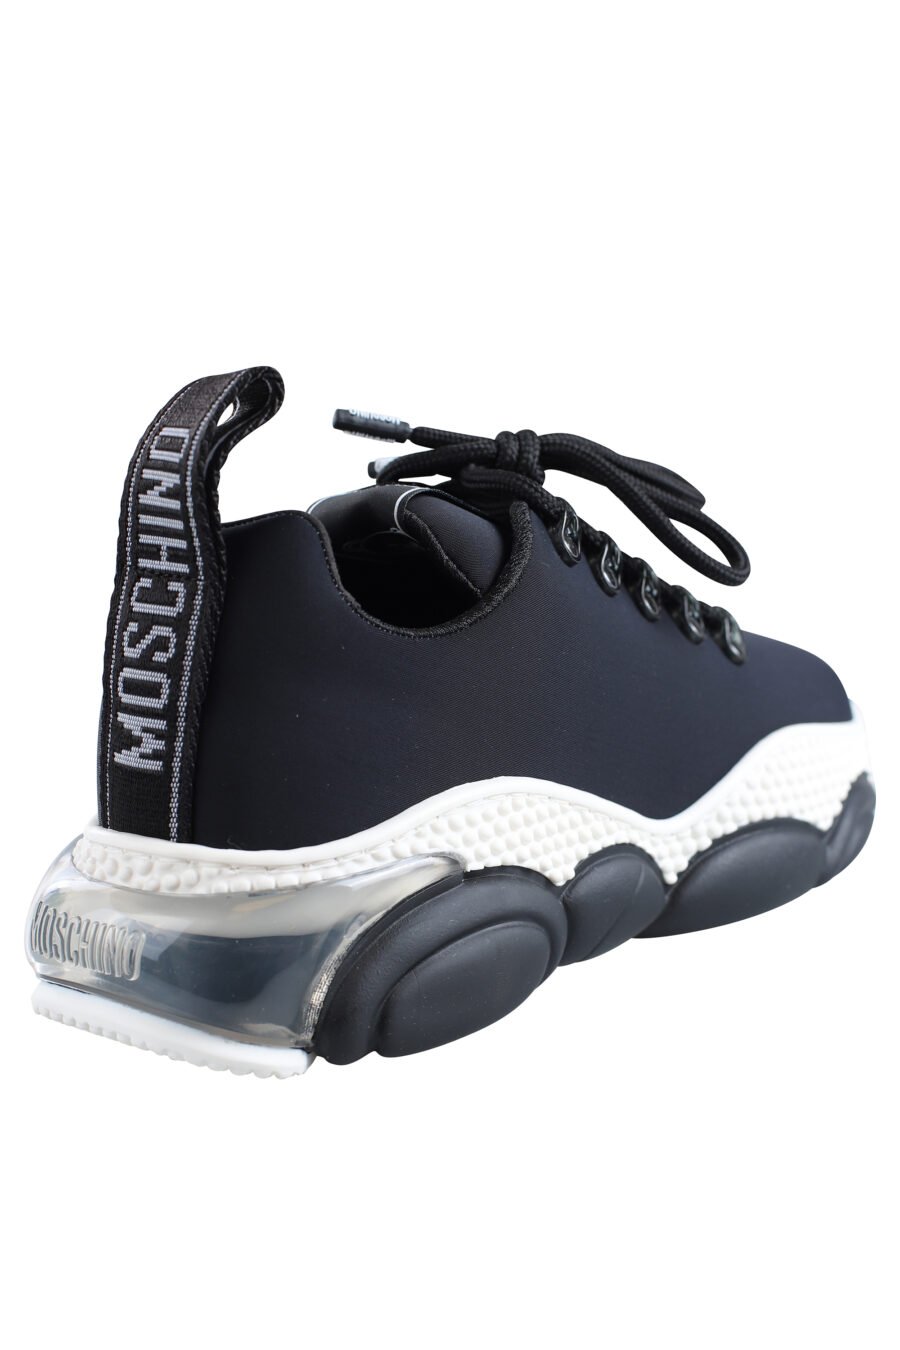 Black and white neoprene trainers with teddy sole - IMG 1963